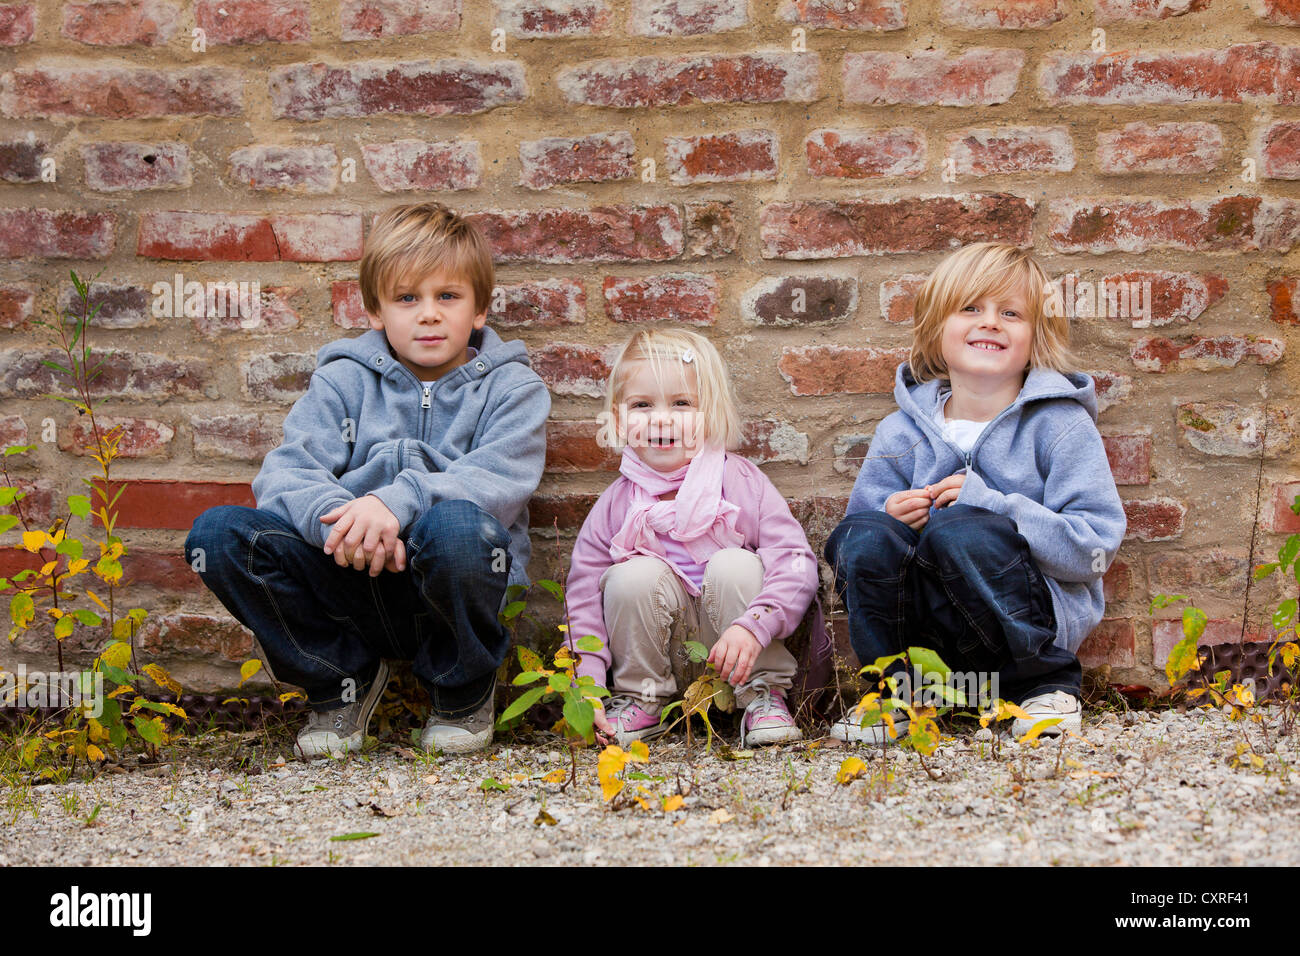 Siblings, 2, 5 and 7 years old, squatting in front of a brick wall Stock Photo